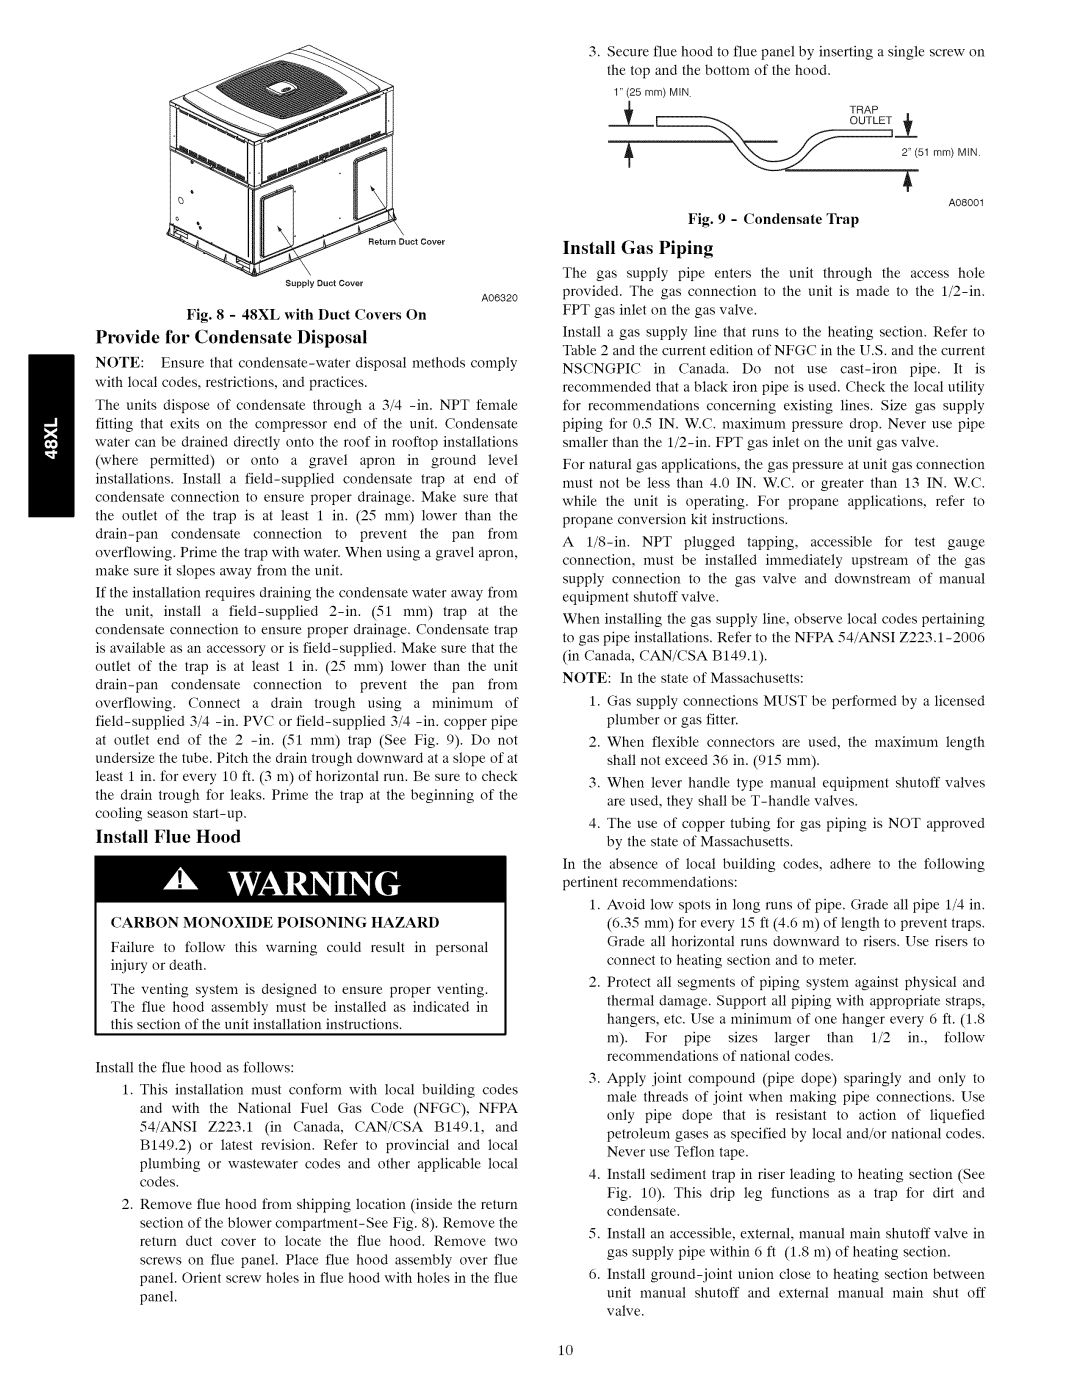 Carrier 48XL installation instructions Provide for Condensate Disposal, Install Flue Hood, Install Gas Piping 